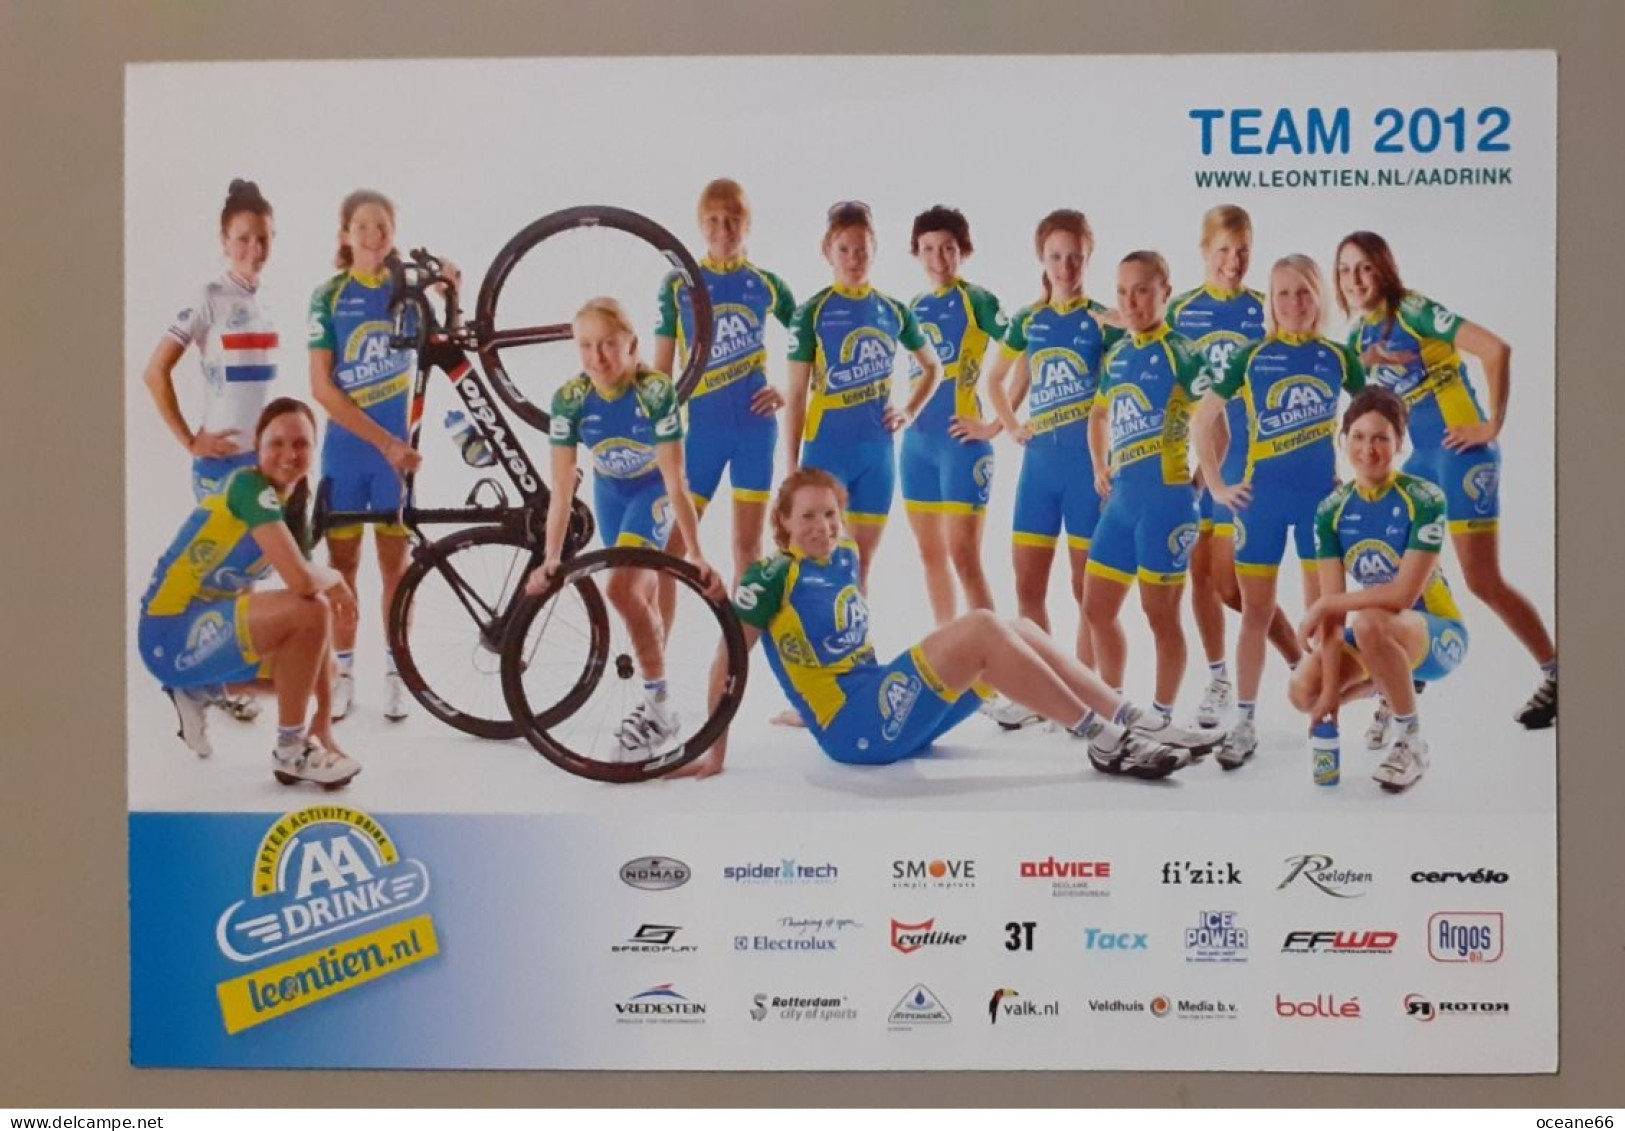 Autographe Lucy Martin Aa Drink Format 13 X 18.5 Cm - Ciclismo